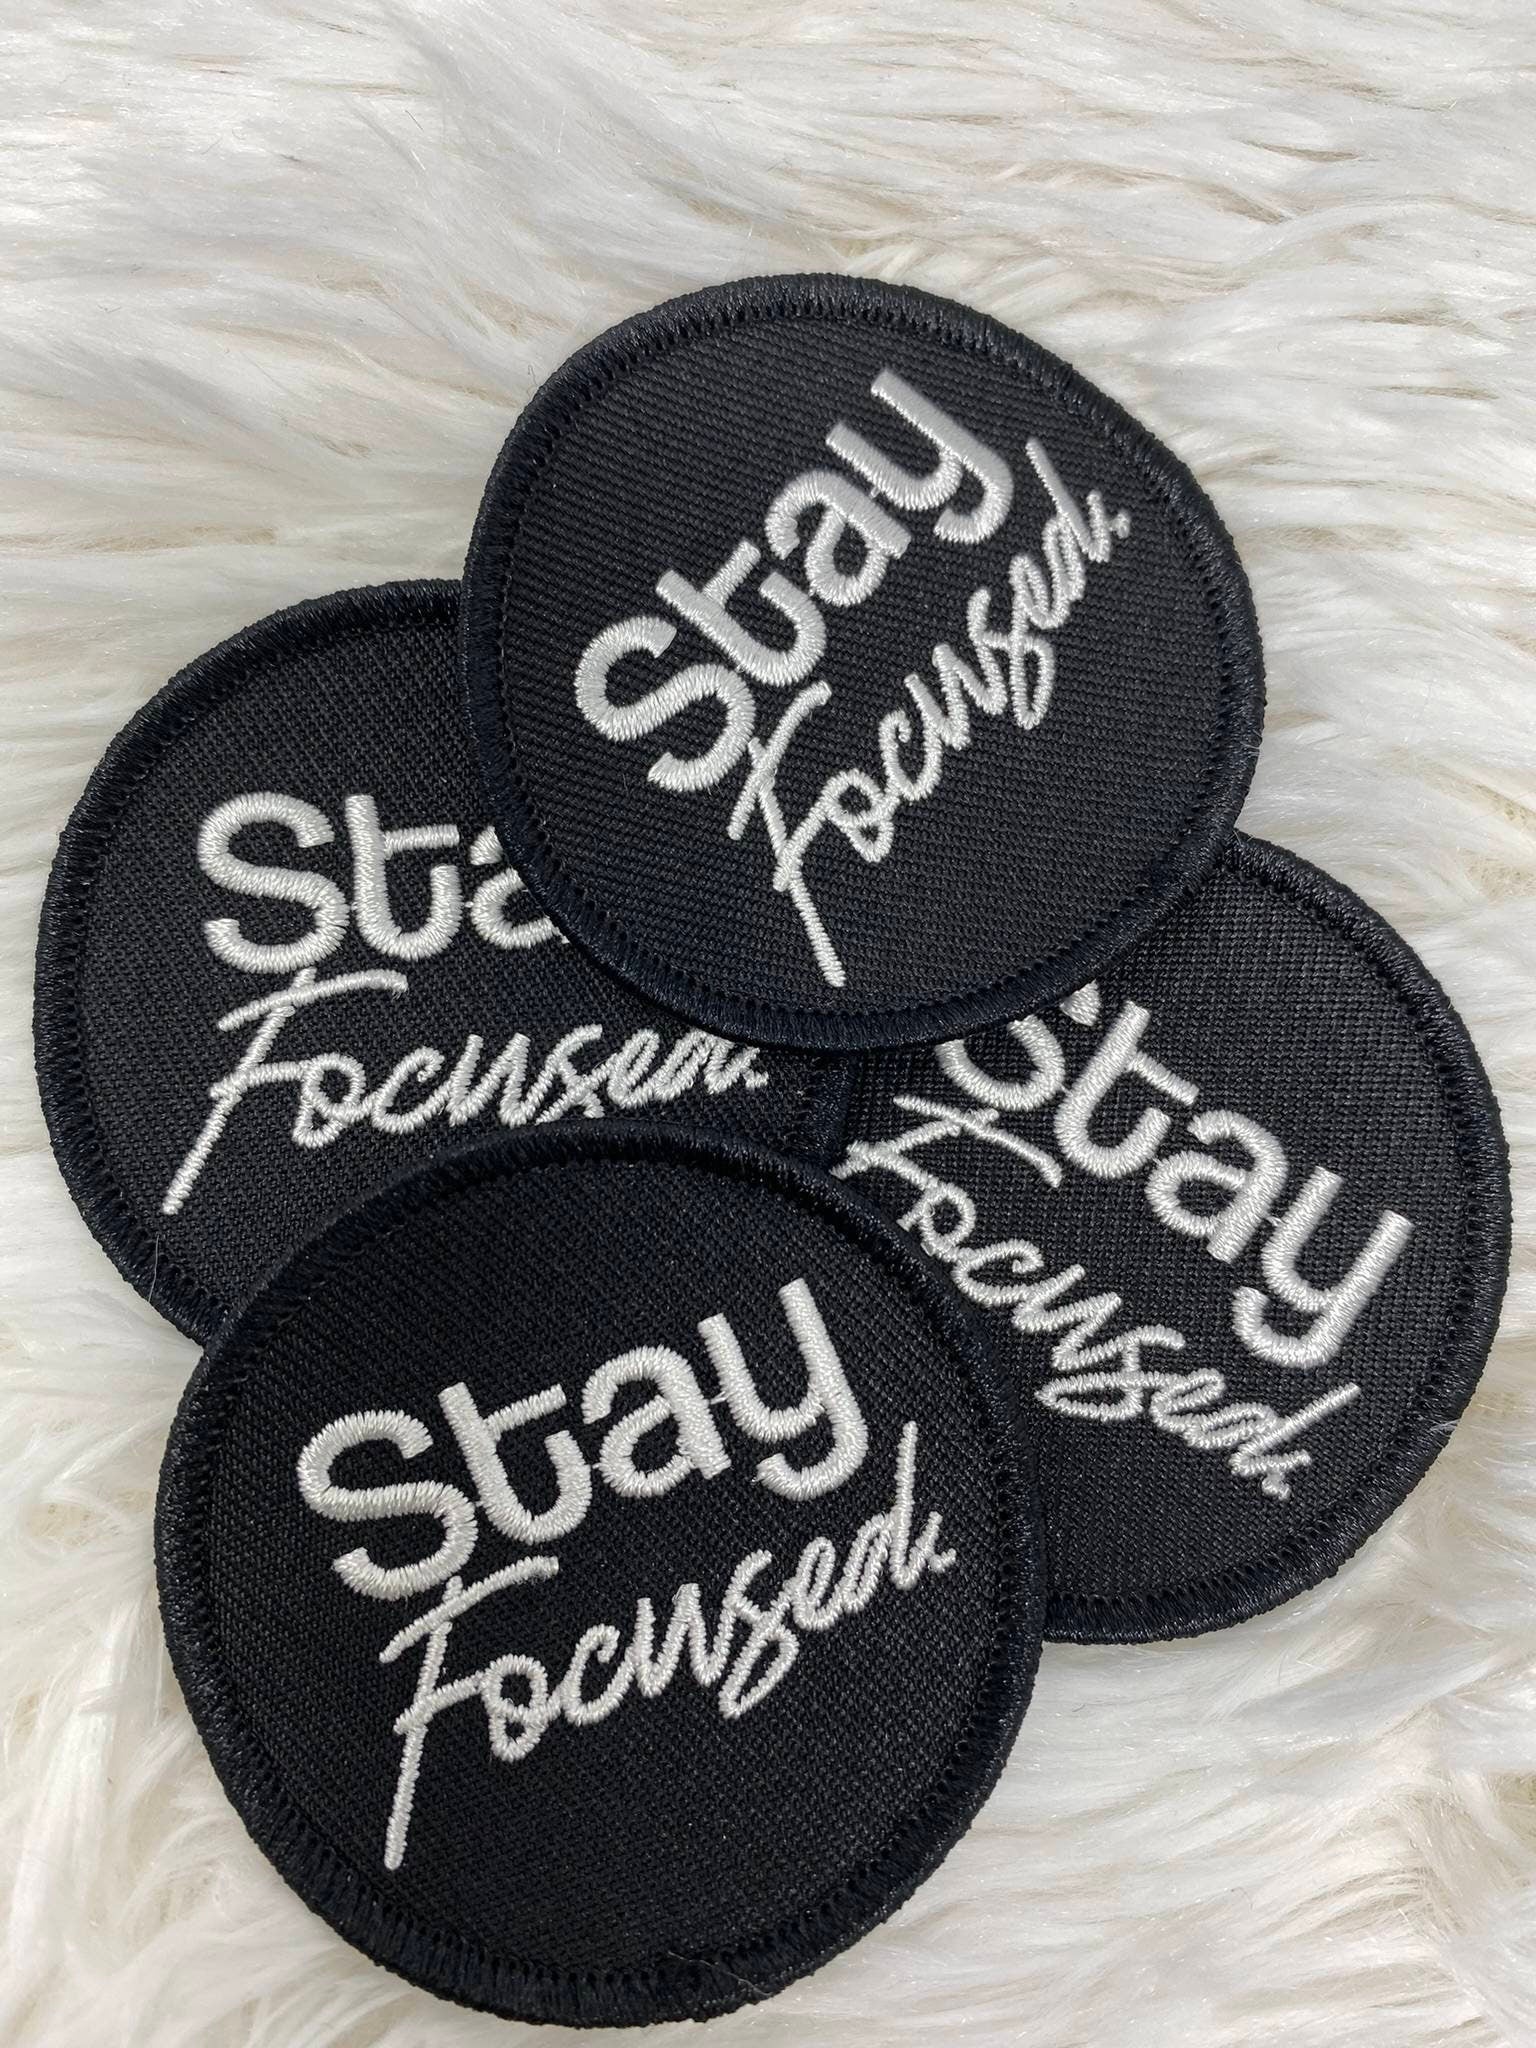 Inspirational,"Stay Focused" Black & White, Iron-on Embroidered Badge, Size 2.75", Minimalist Patch for Hats, Crocs, Apparel and Accessories